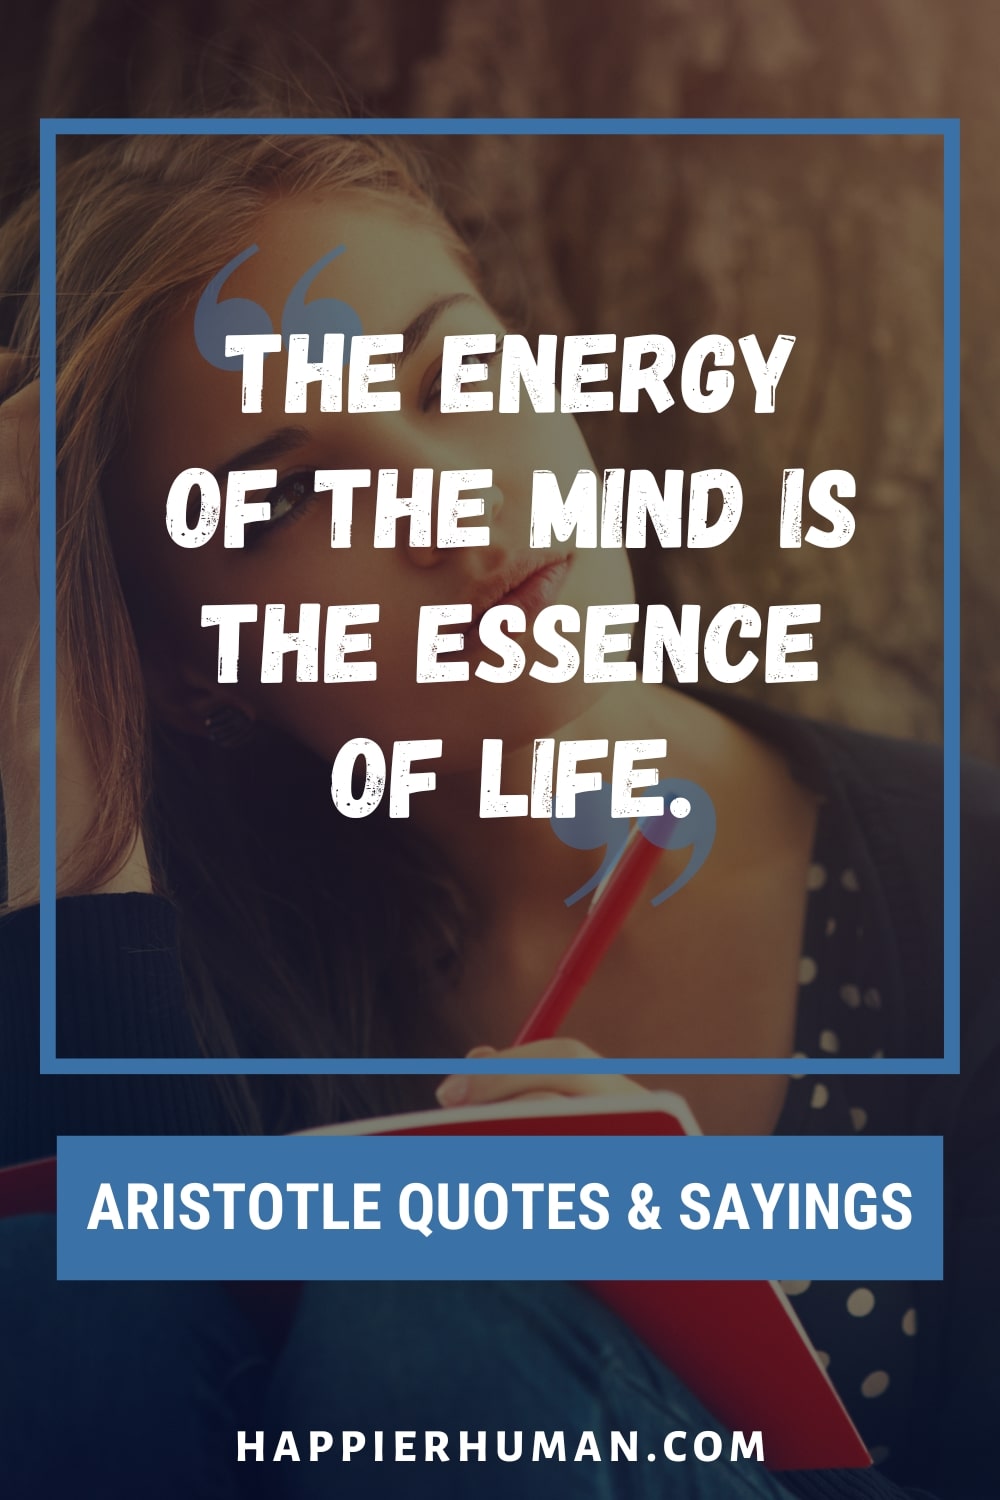 aristotle quotes education | aristotle quotes on education | aristotle quotes on life